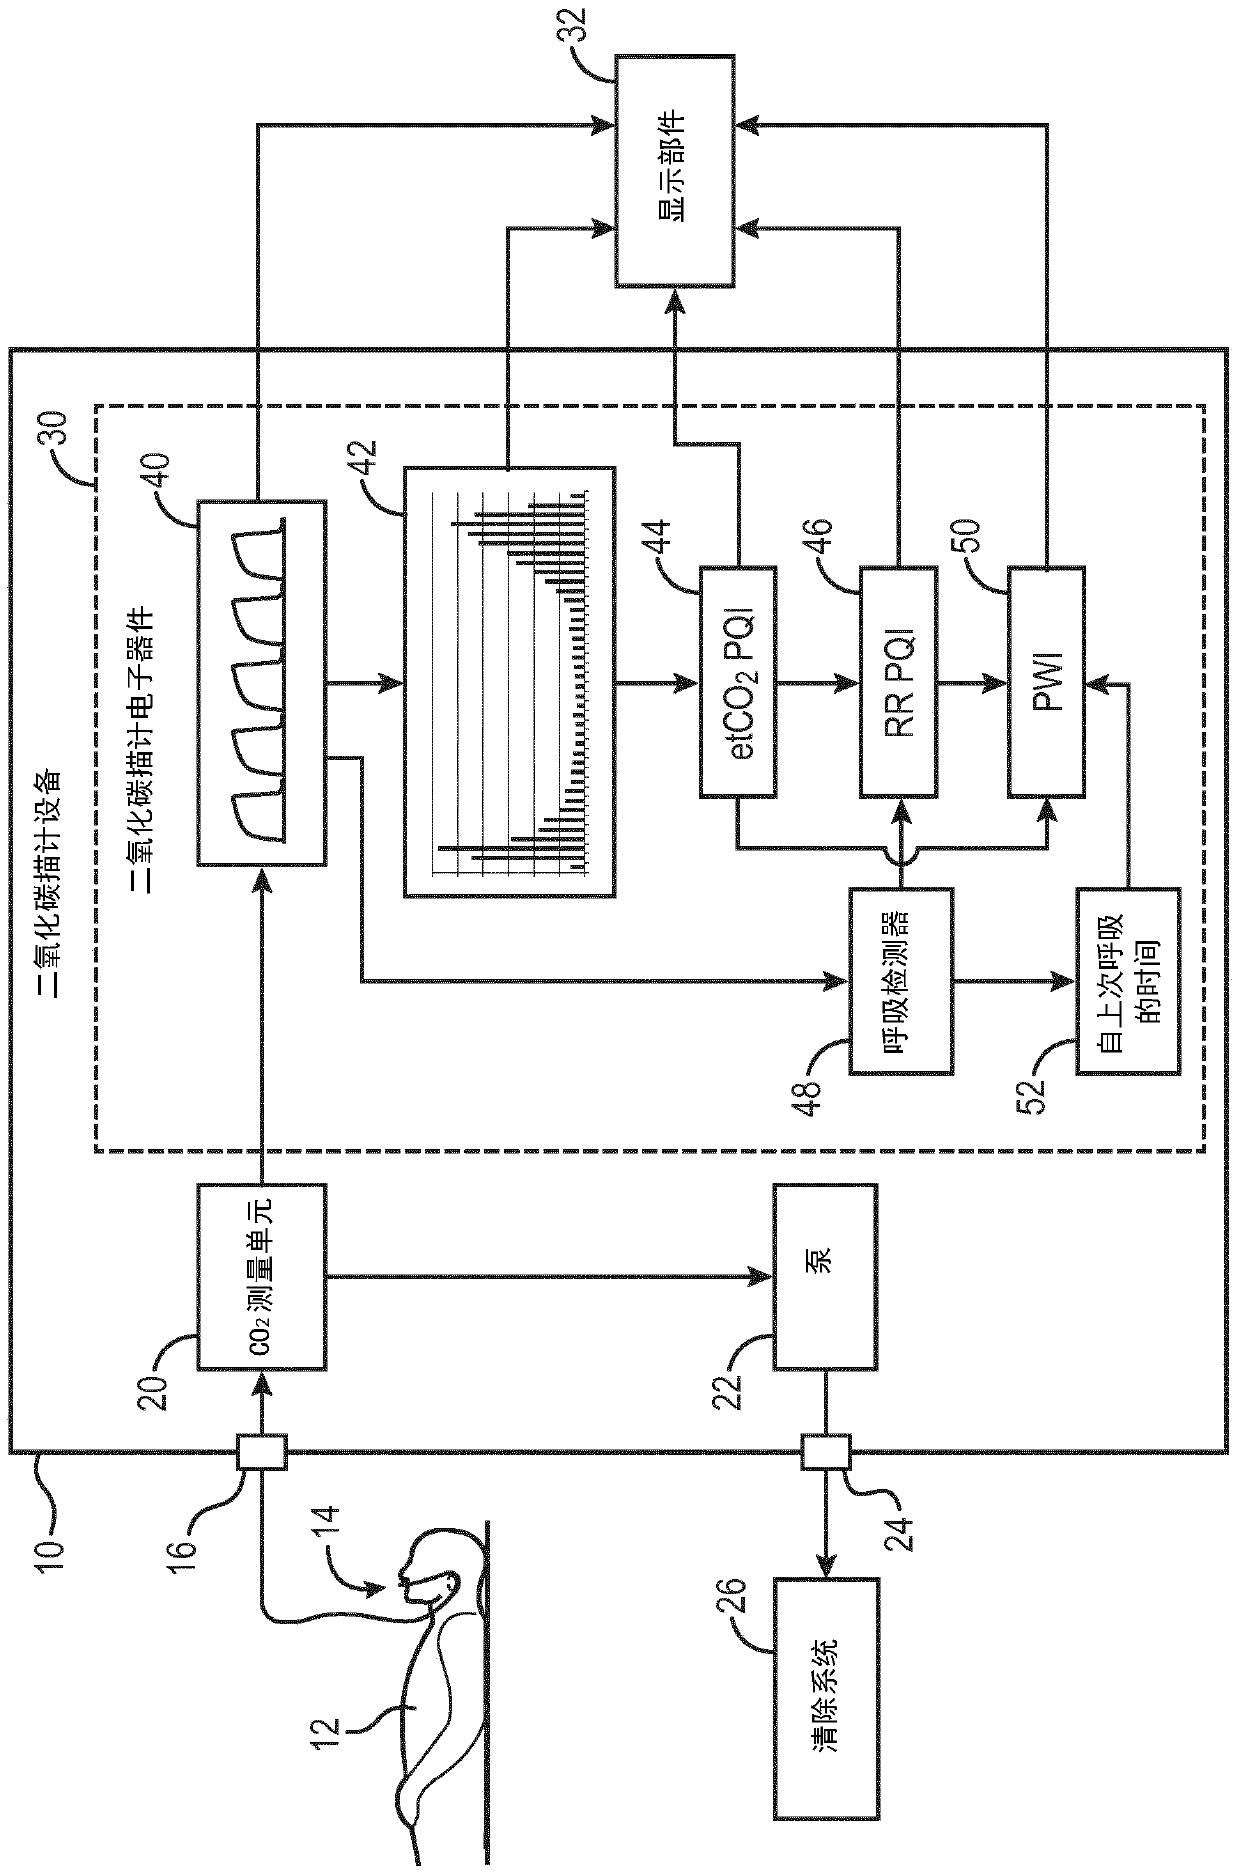 Physiologic monitoring decision support system combining capnometry and oxygen saturation